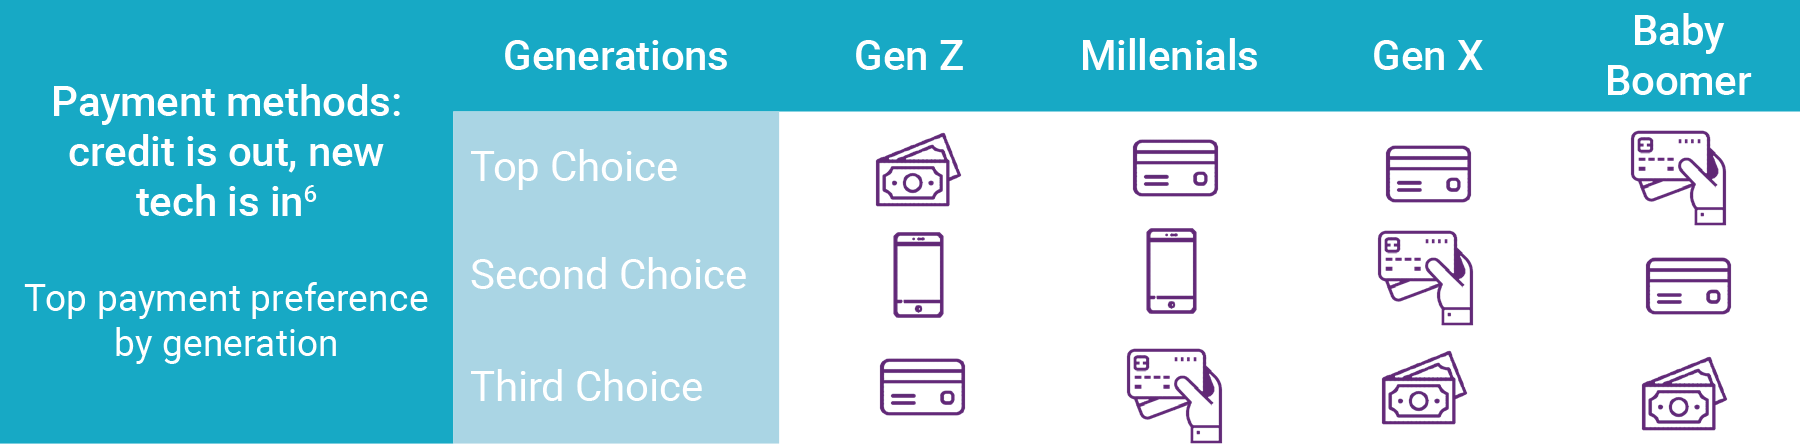 Have you identified industries well positioned to grow with Gen Z?